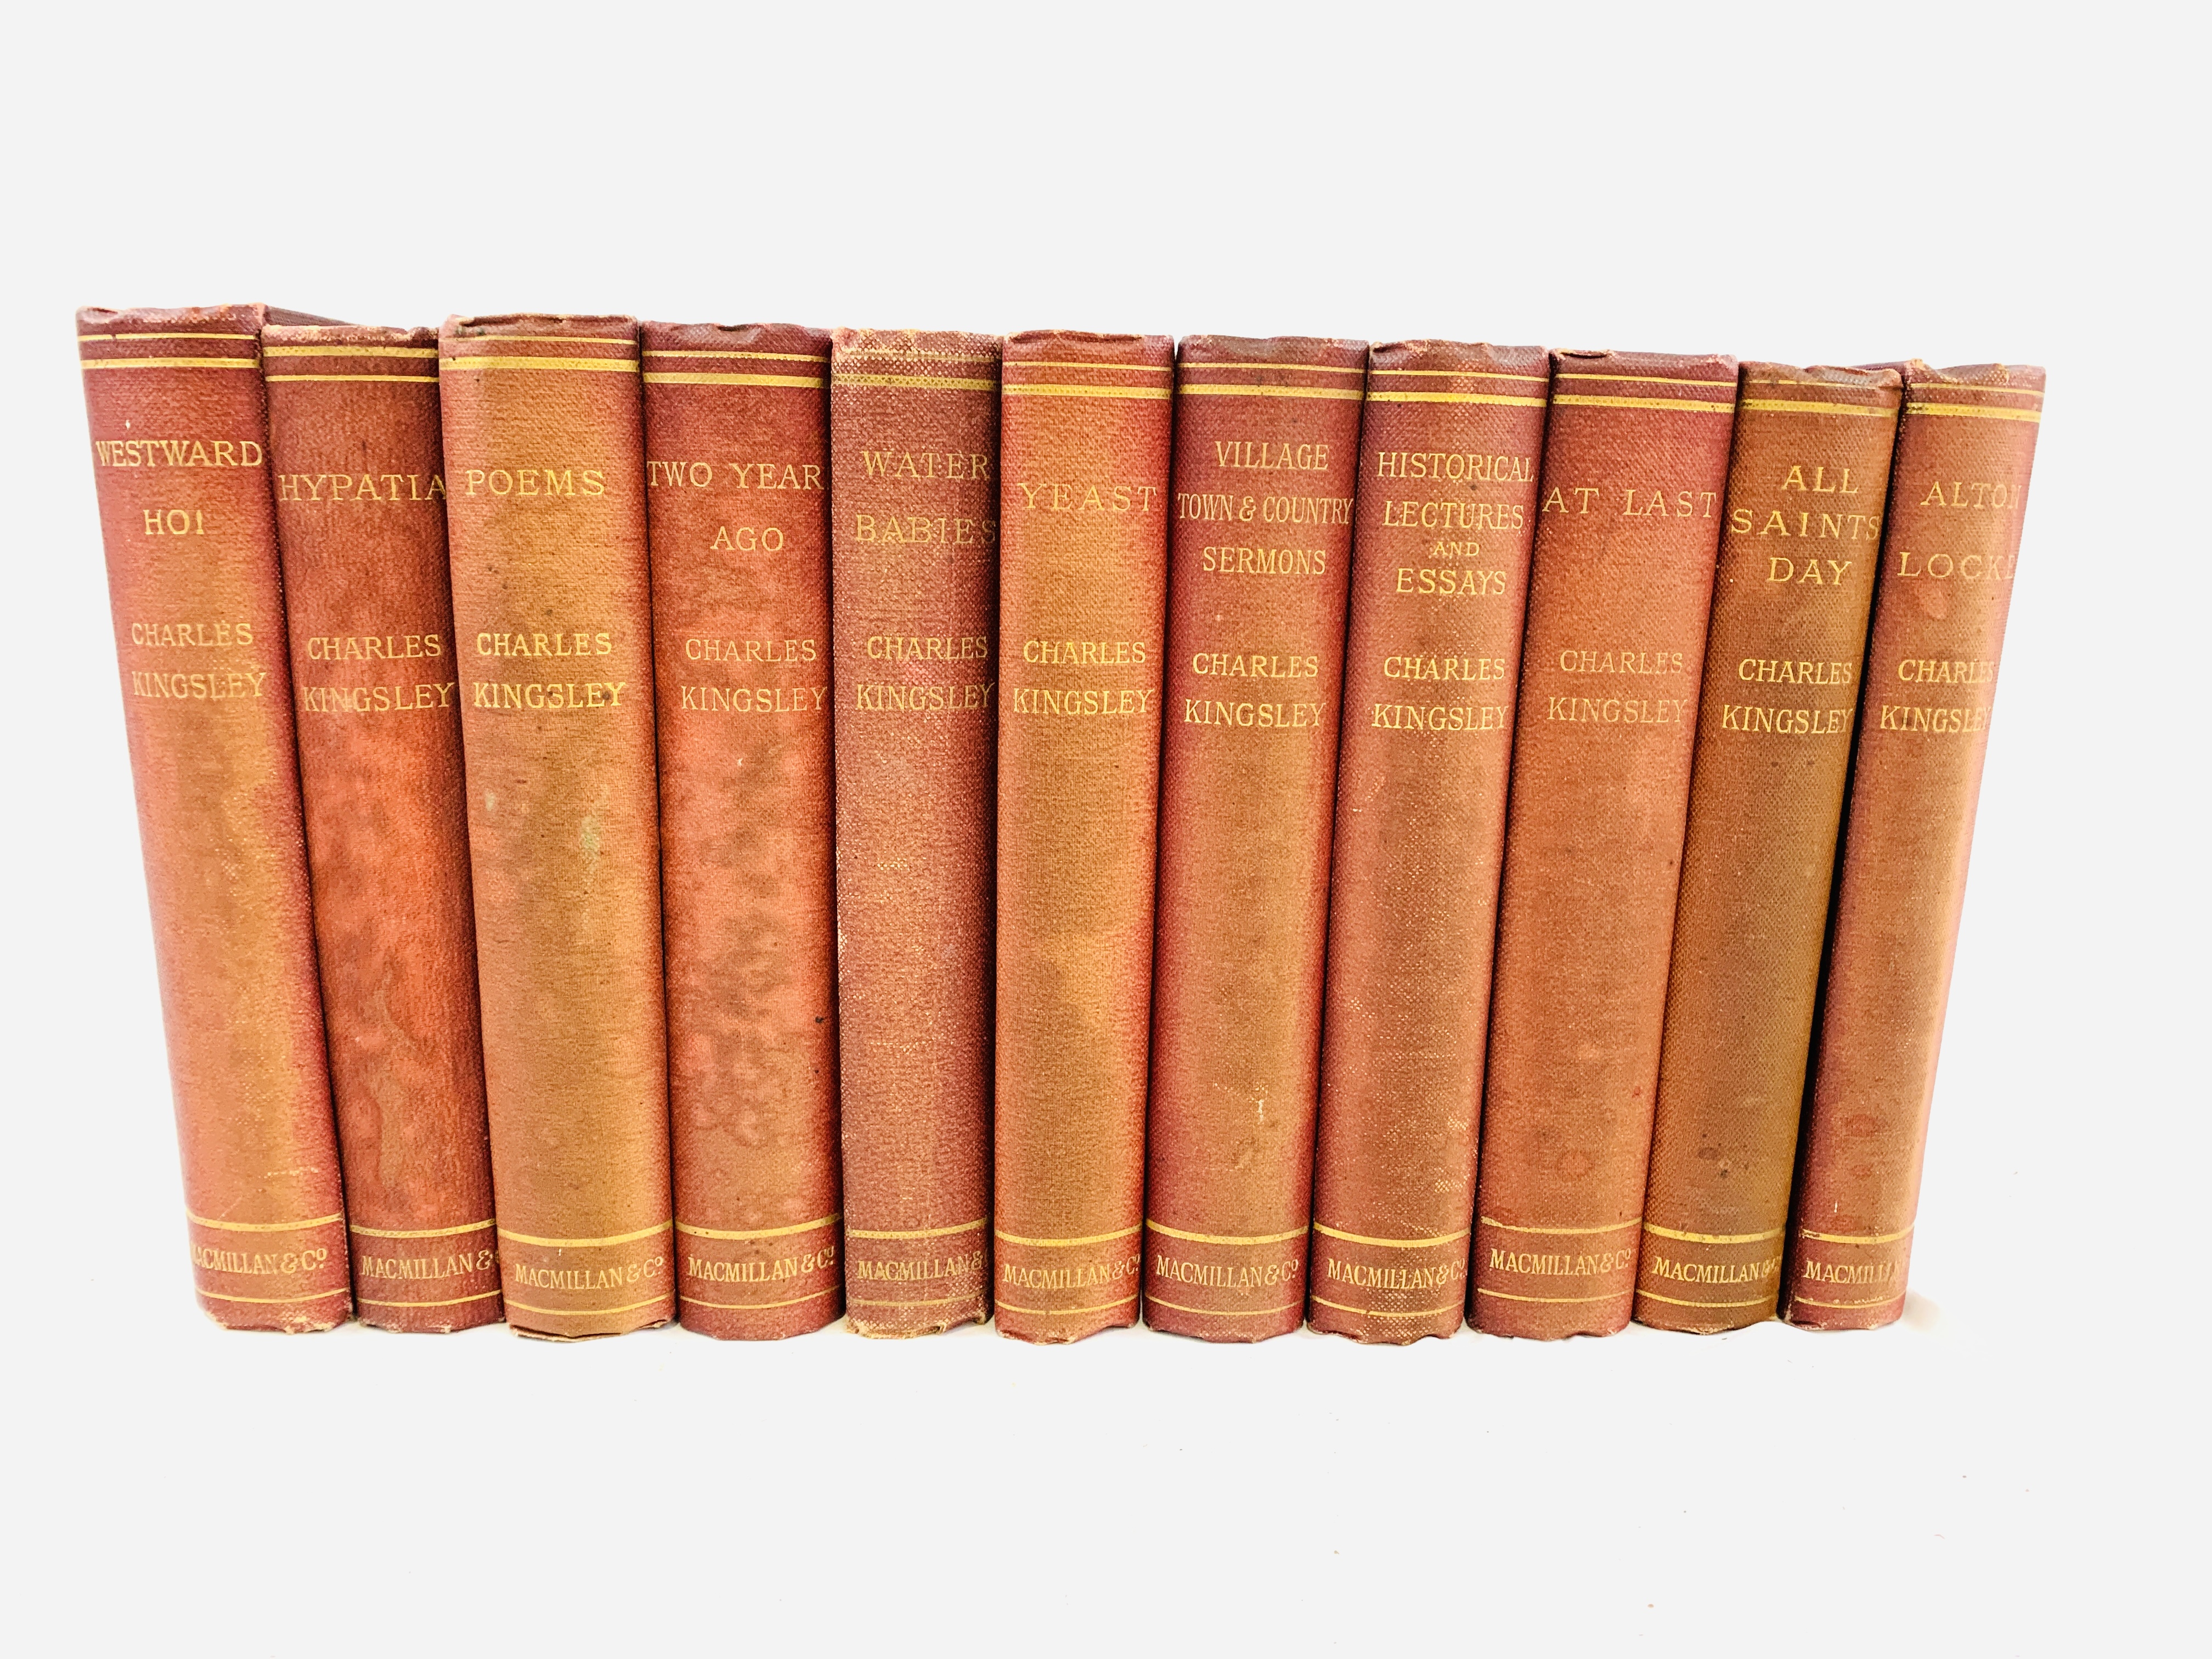 Collection of eleven volumes of the author's novels, 1889 - 1895, Charles Kingsley.